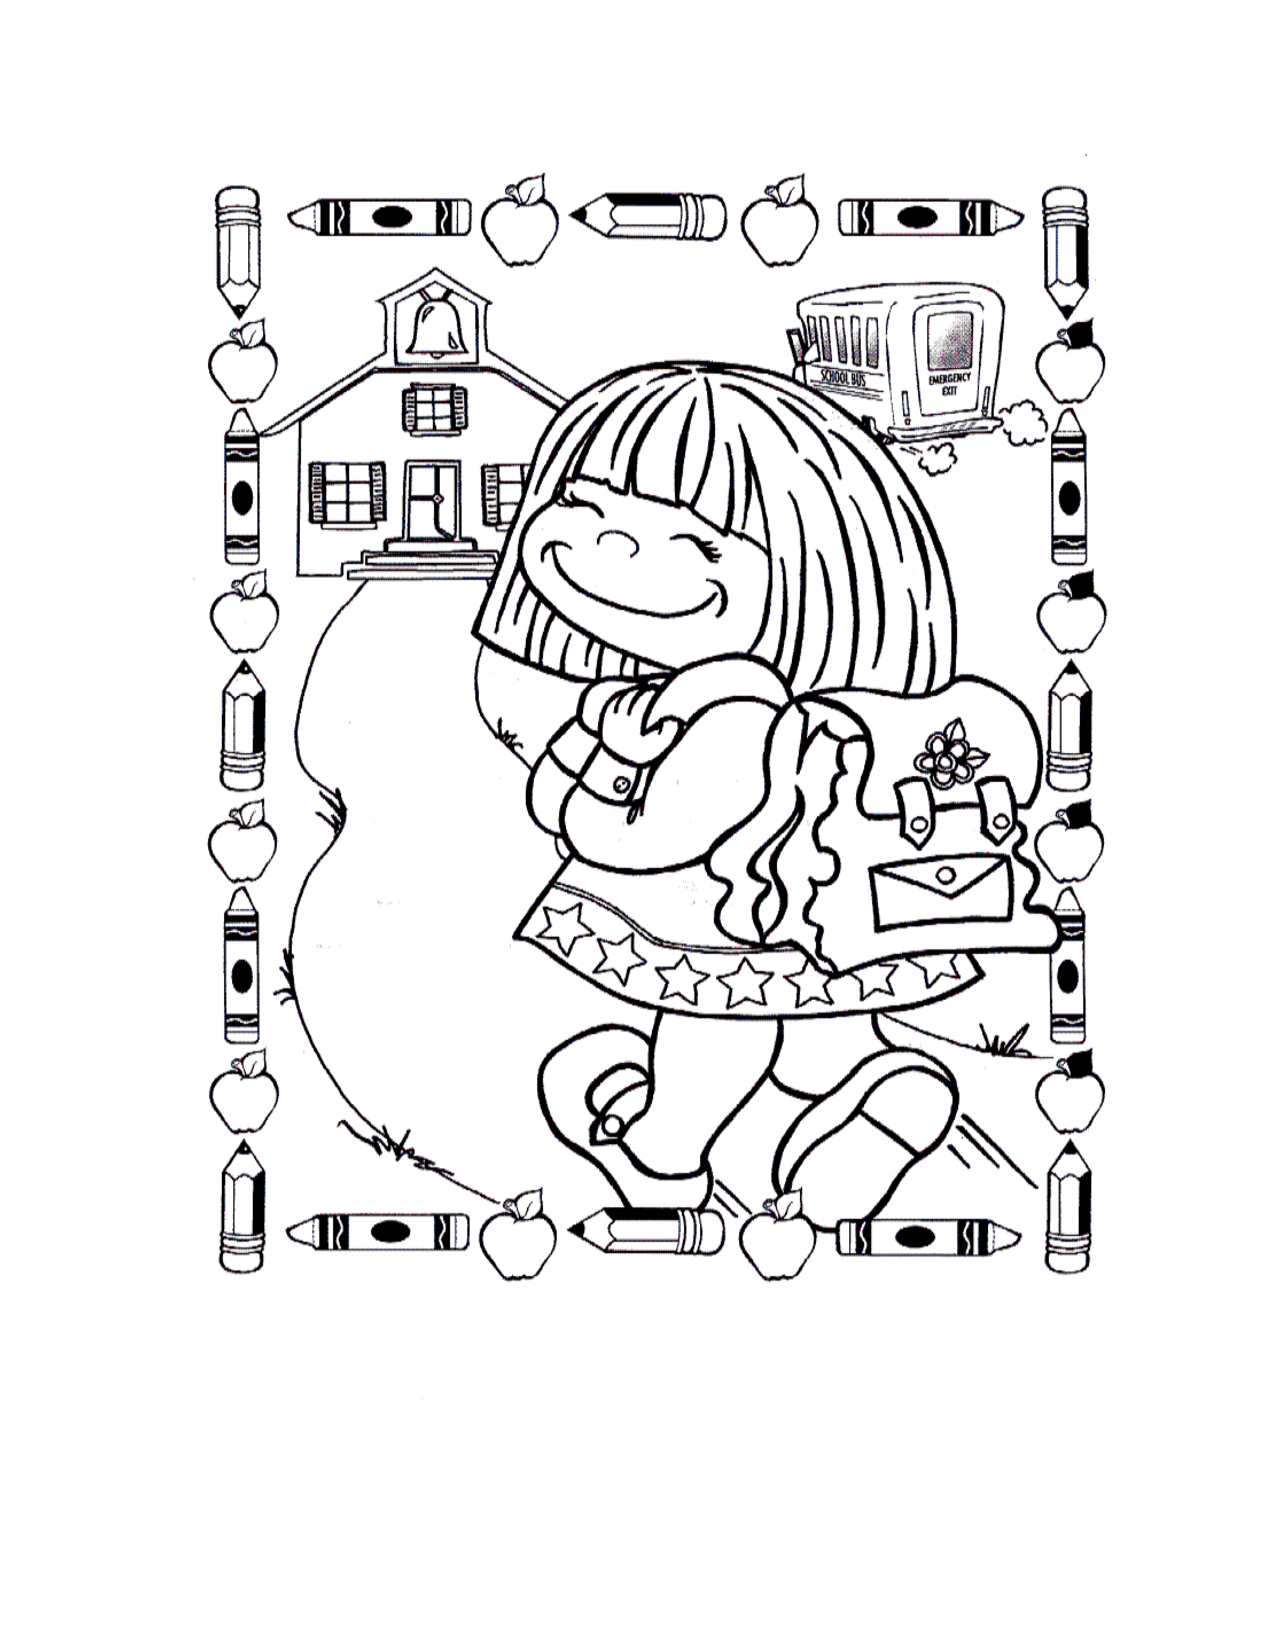 free-coloring-pages-for-first-grade-coloring-home